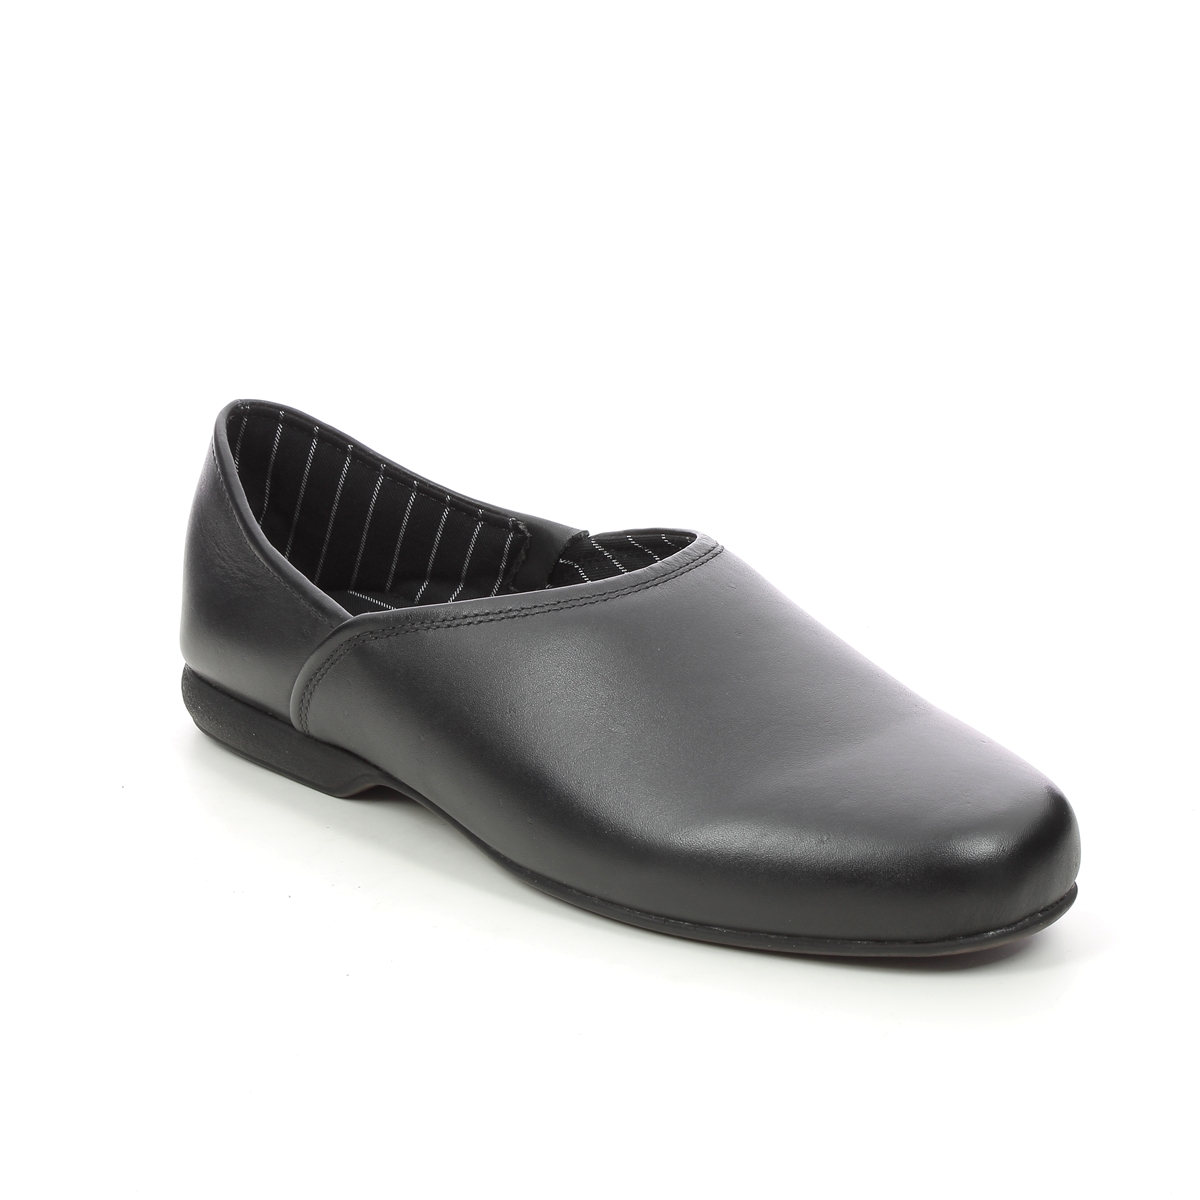 Clarks Harston Elite Black Leather Mens Slippers 447207G In Size 9 In Plain Black Leather G Width Fitting